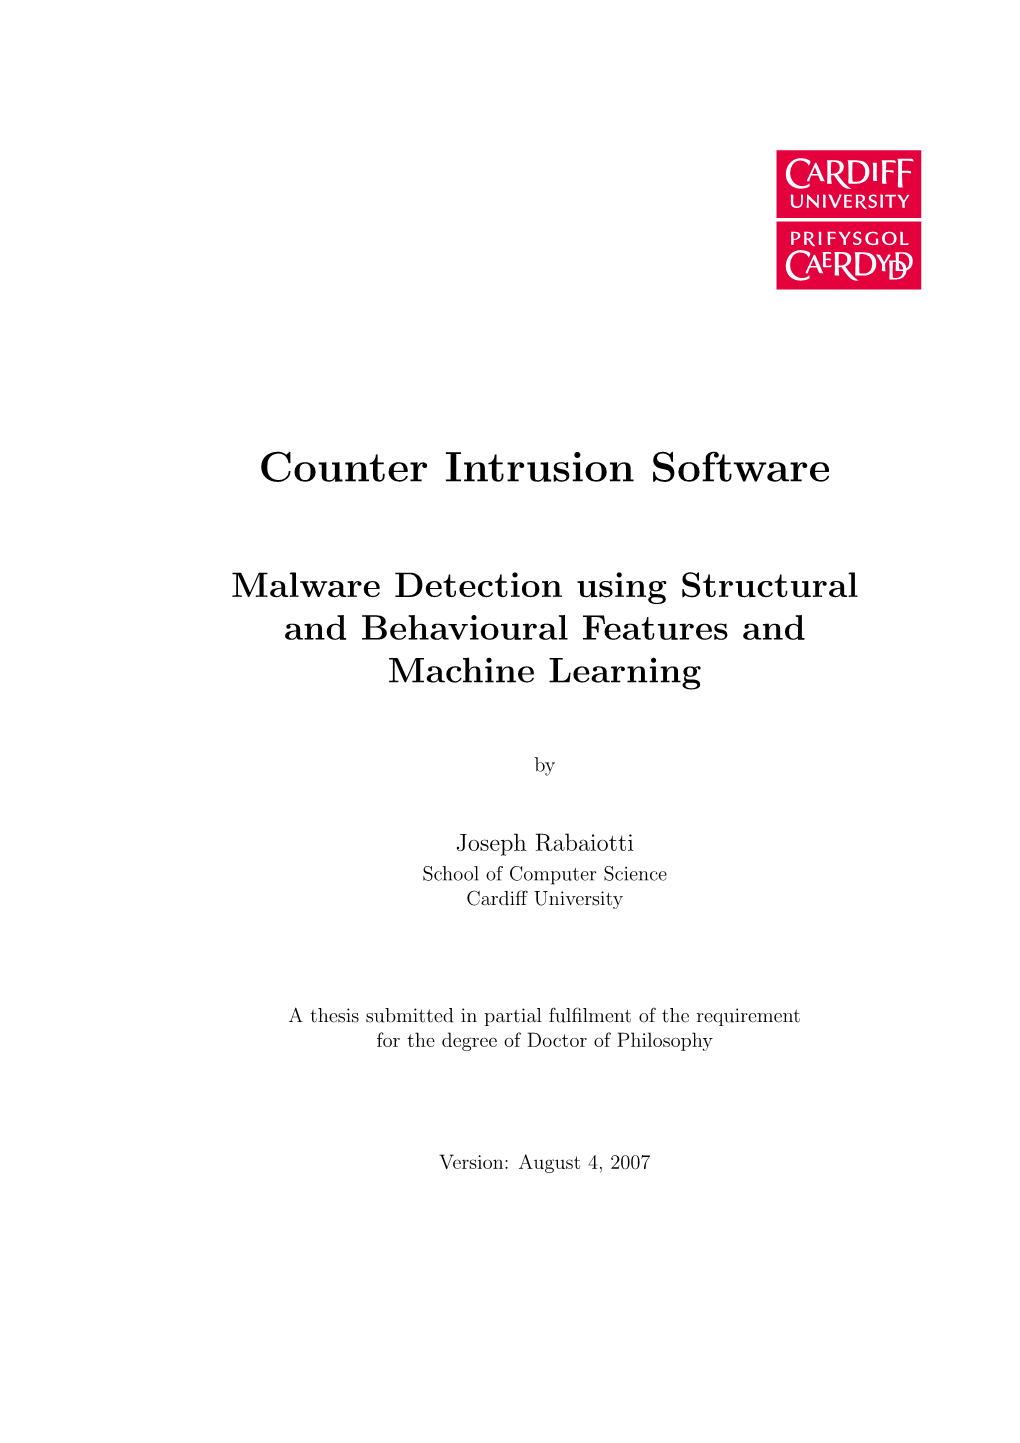 Counter Intrusion Software: Malware Detection Using Structural and Behavioural Features and Machine Learning